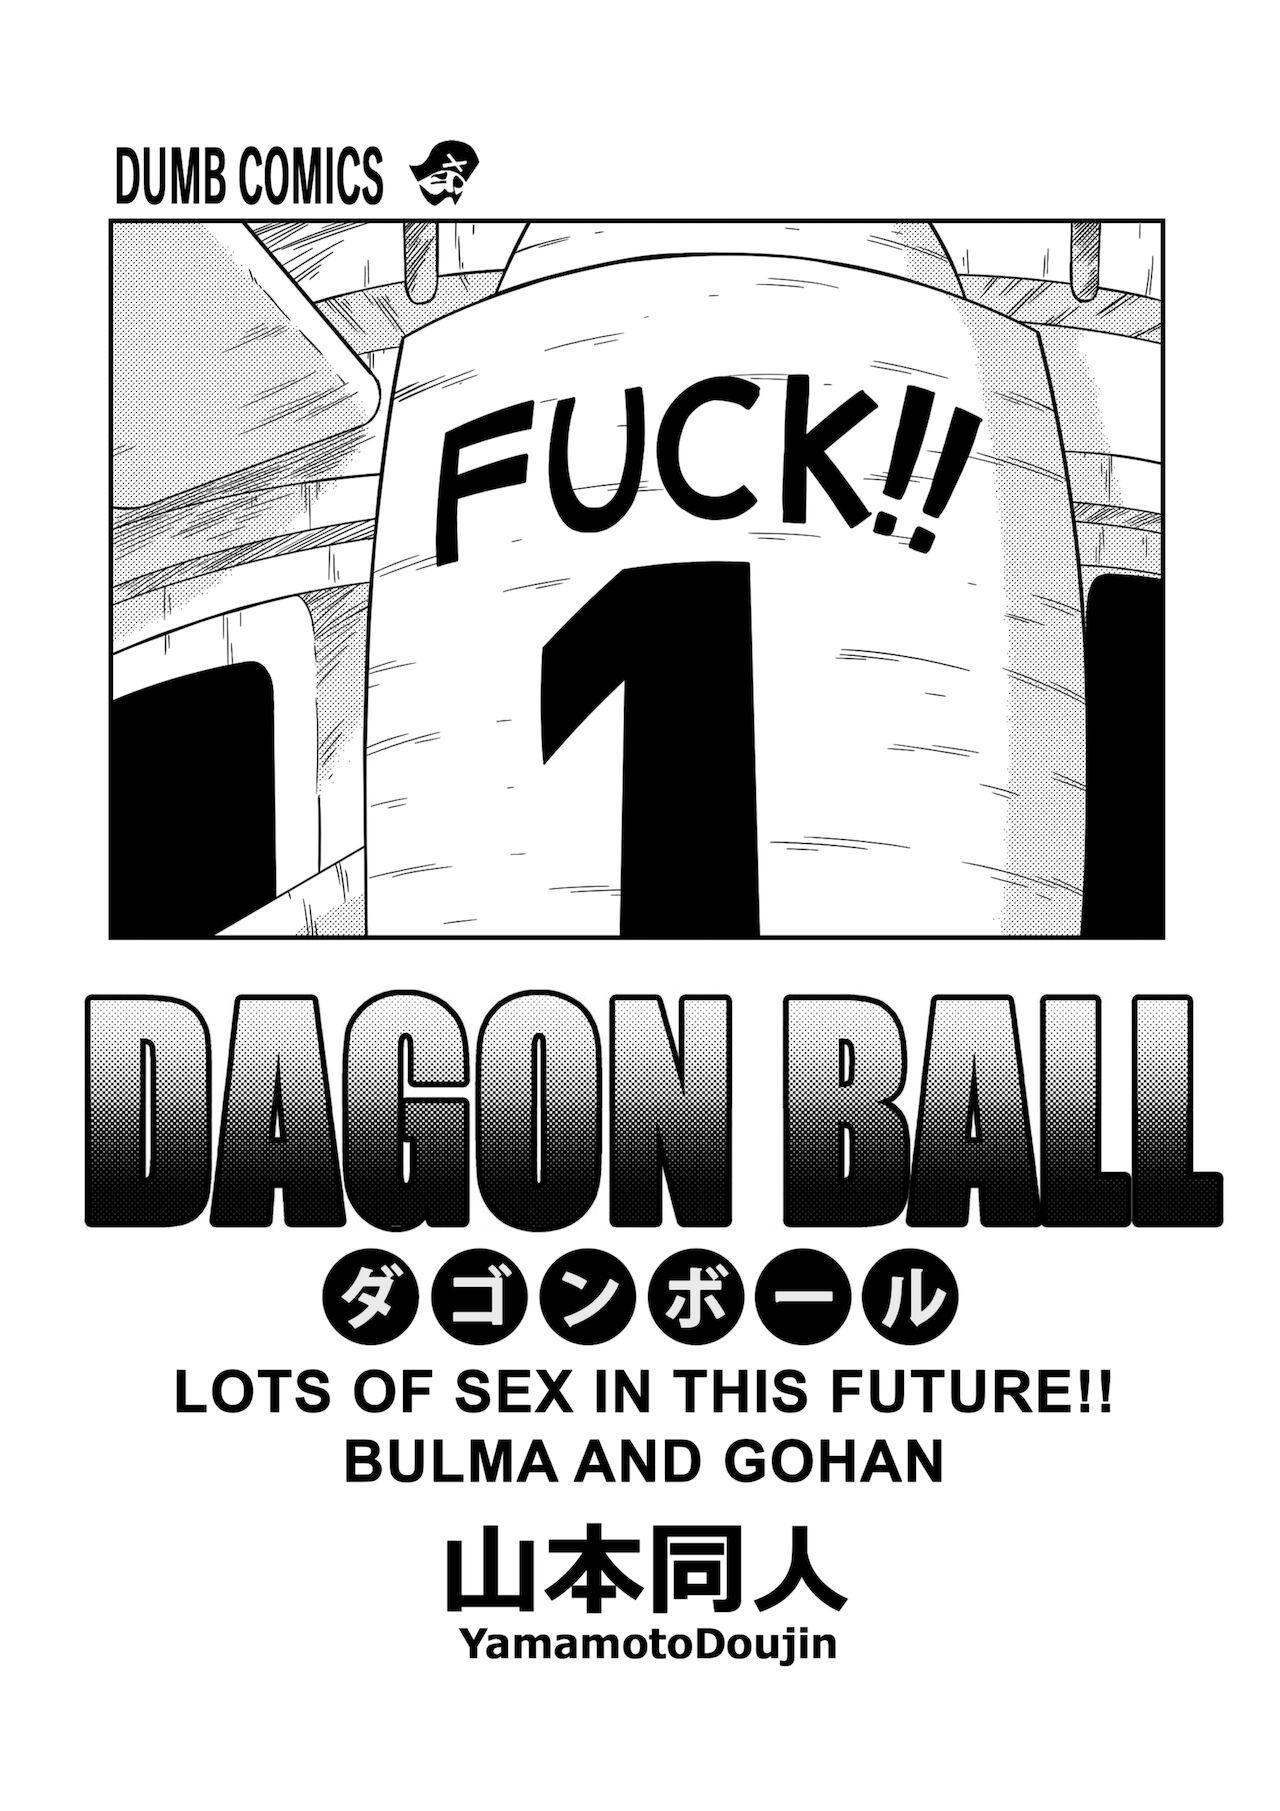 Hymen Lots of Sex in this Future!! - Dragon ball z Brother Sister - Page 2